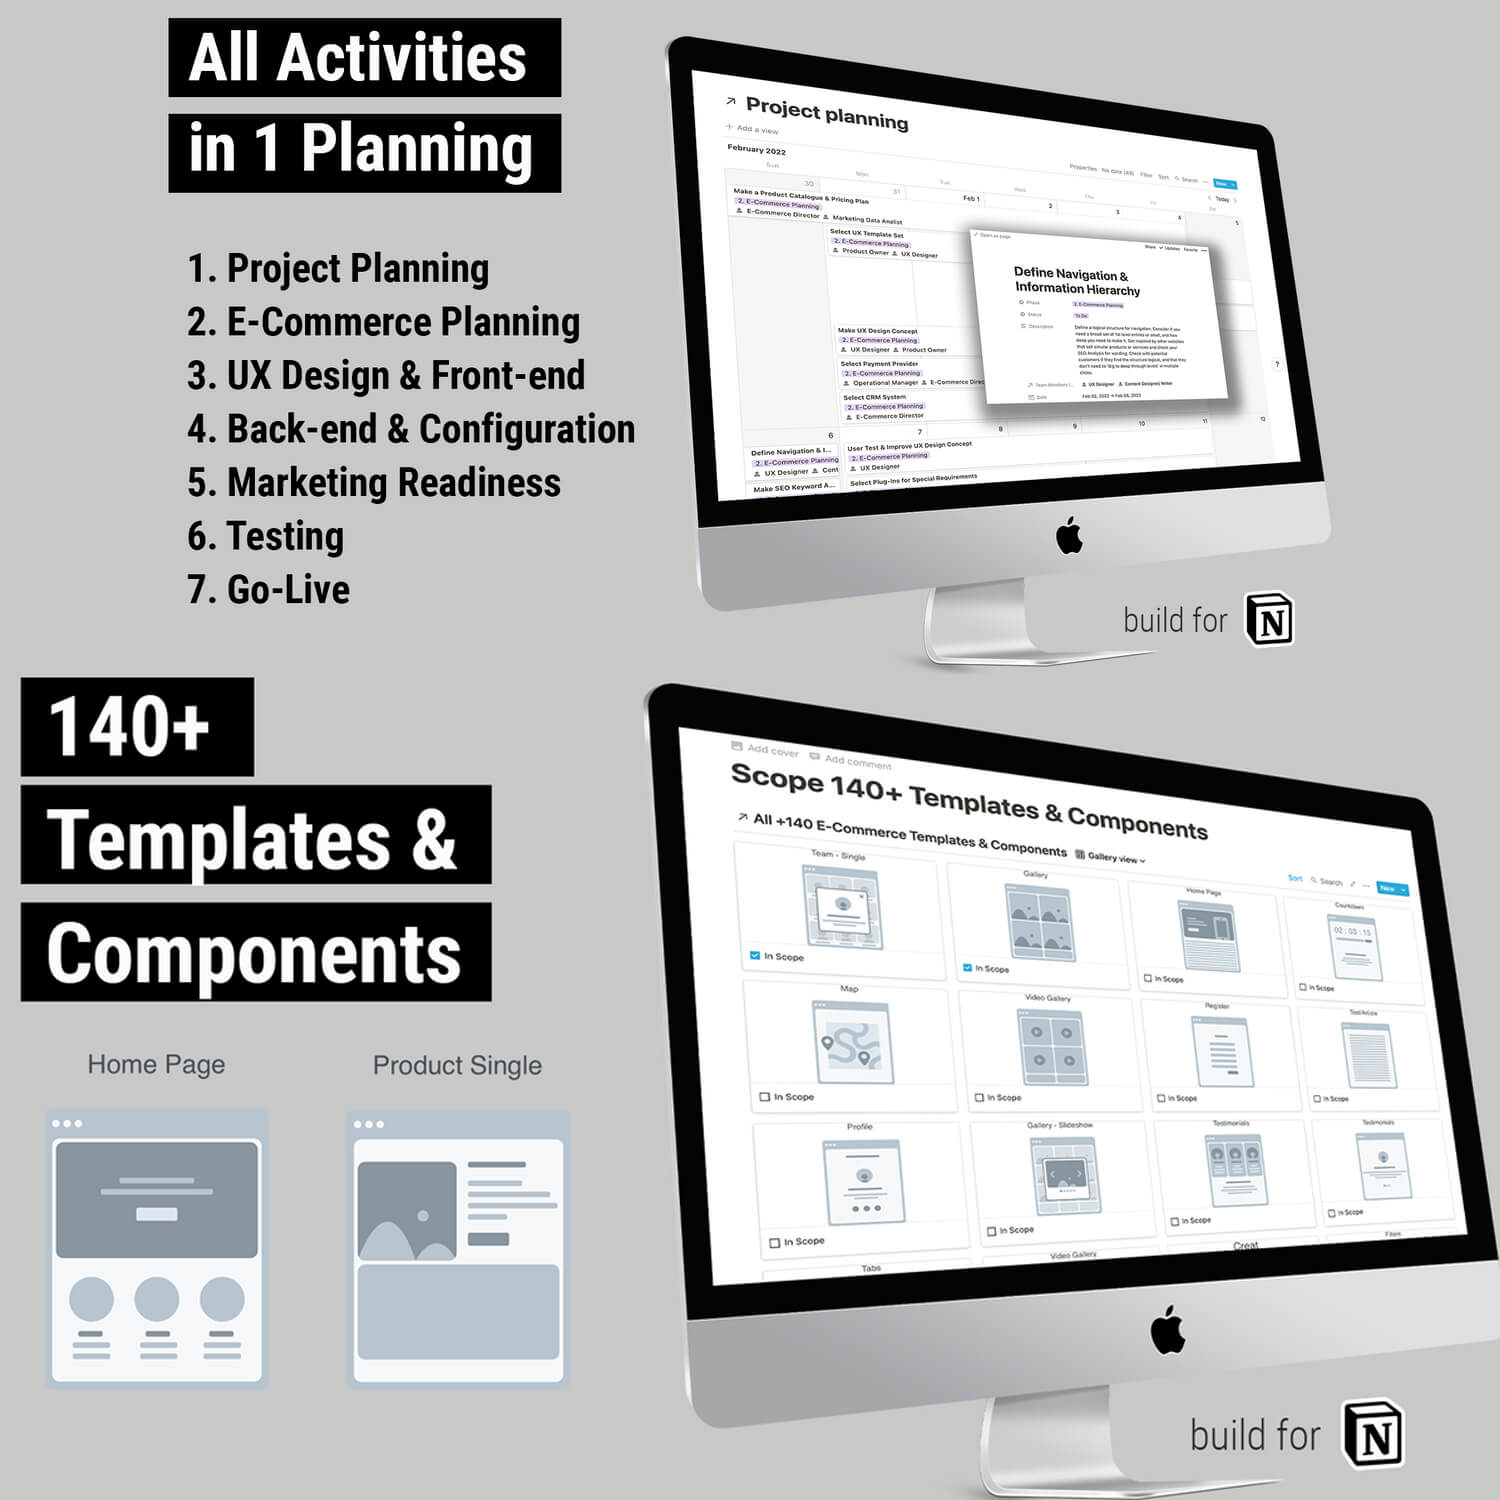 All Activities in 1 Planning, 140+ Templates & Components.